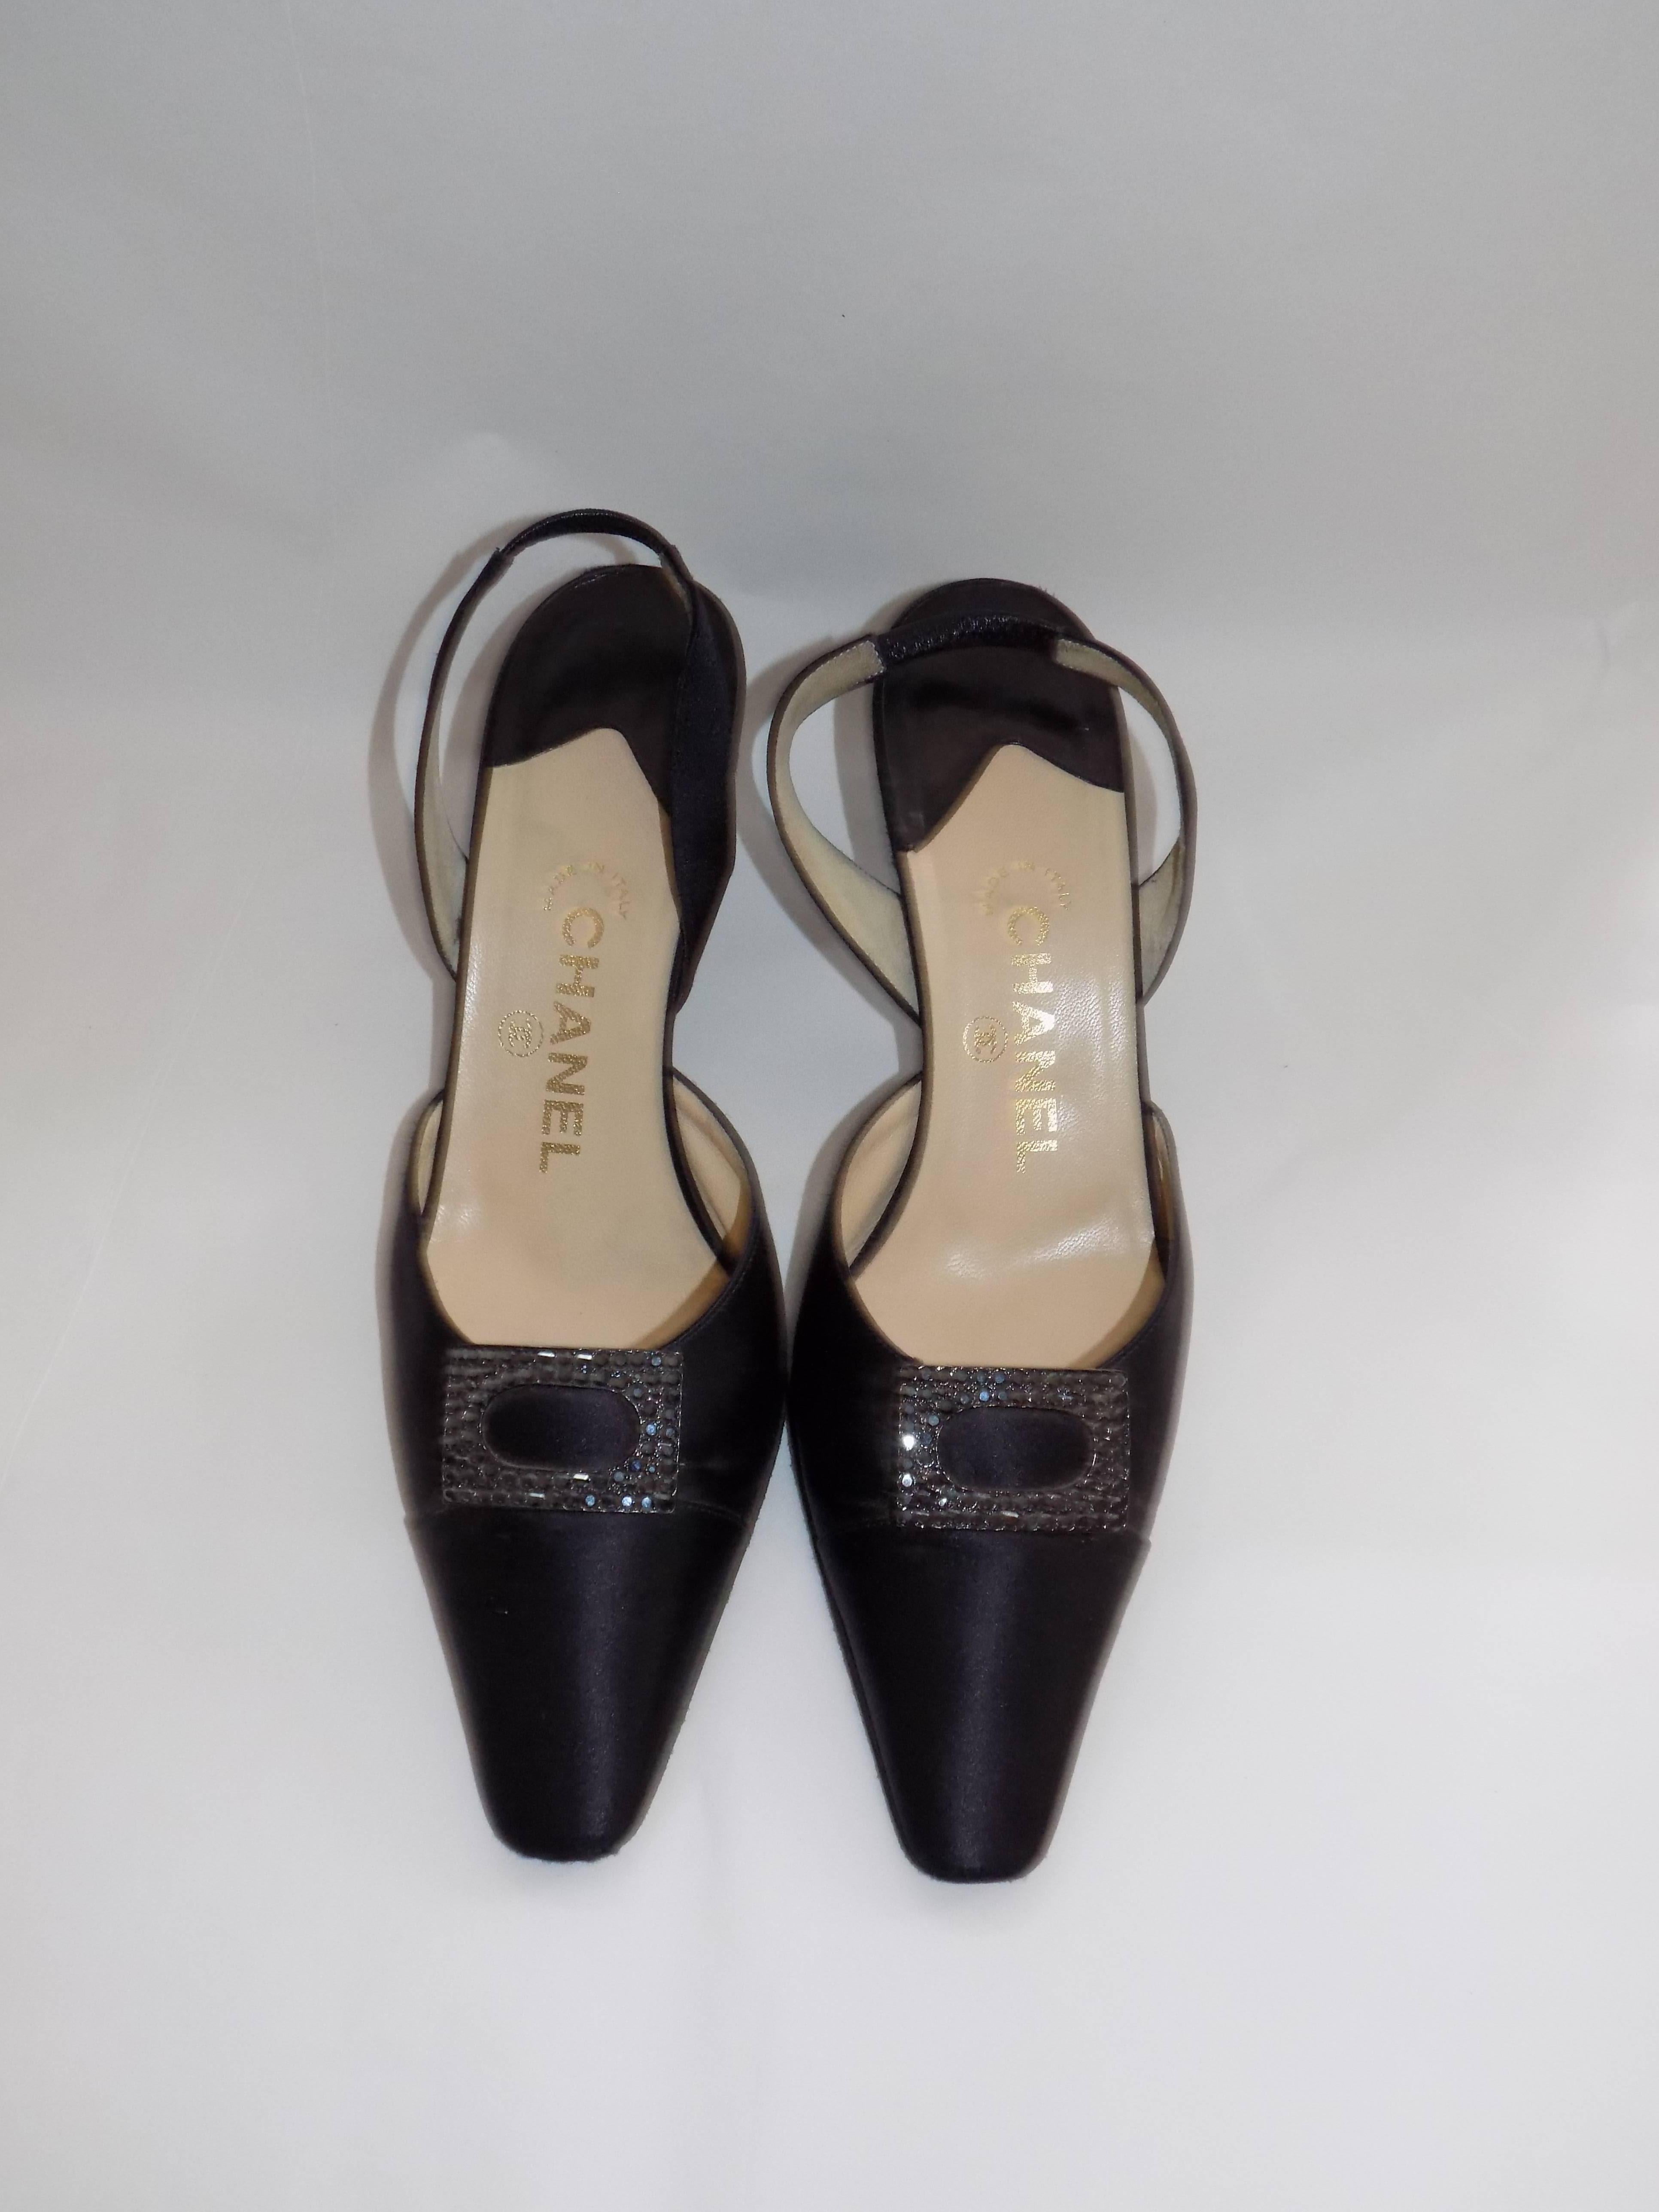 Black Chanel Slingback Evening Shoe With Crystals For Sale